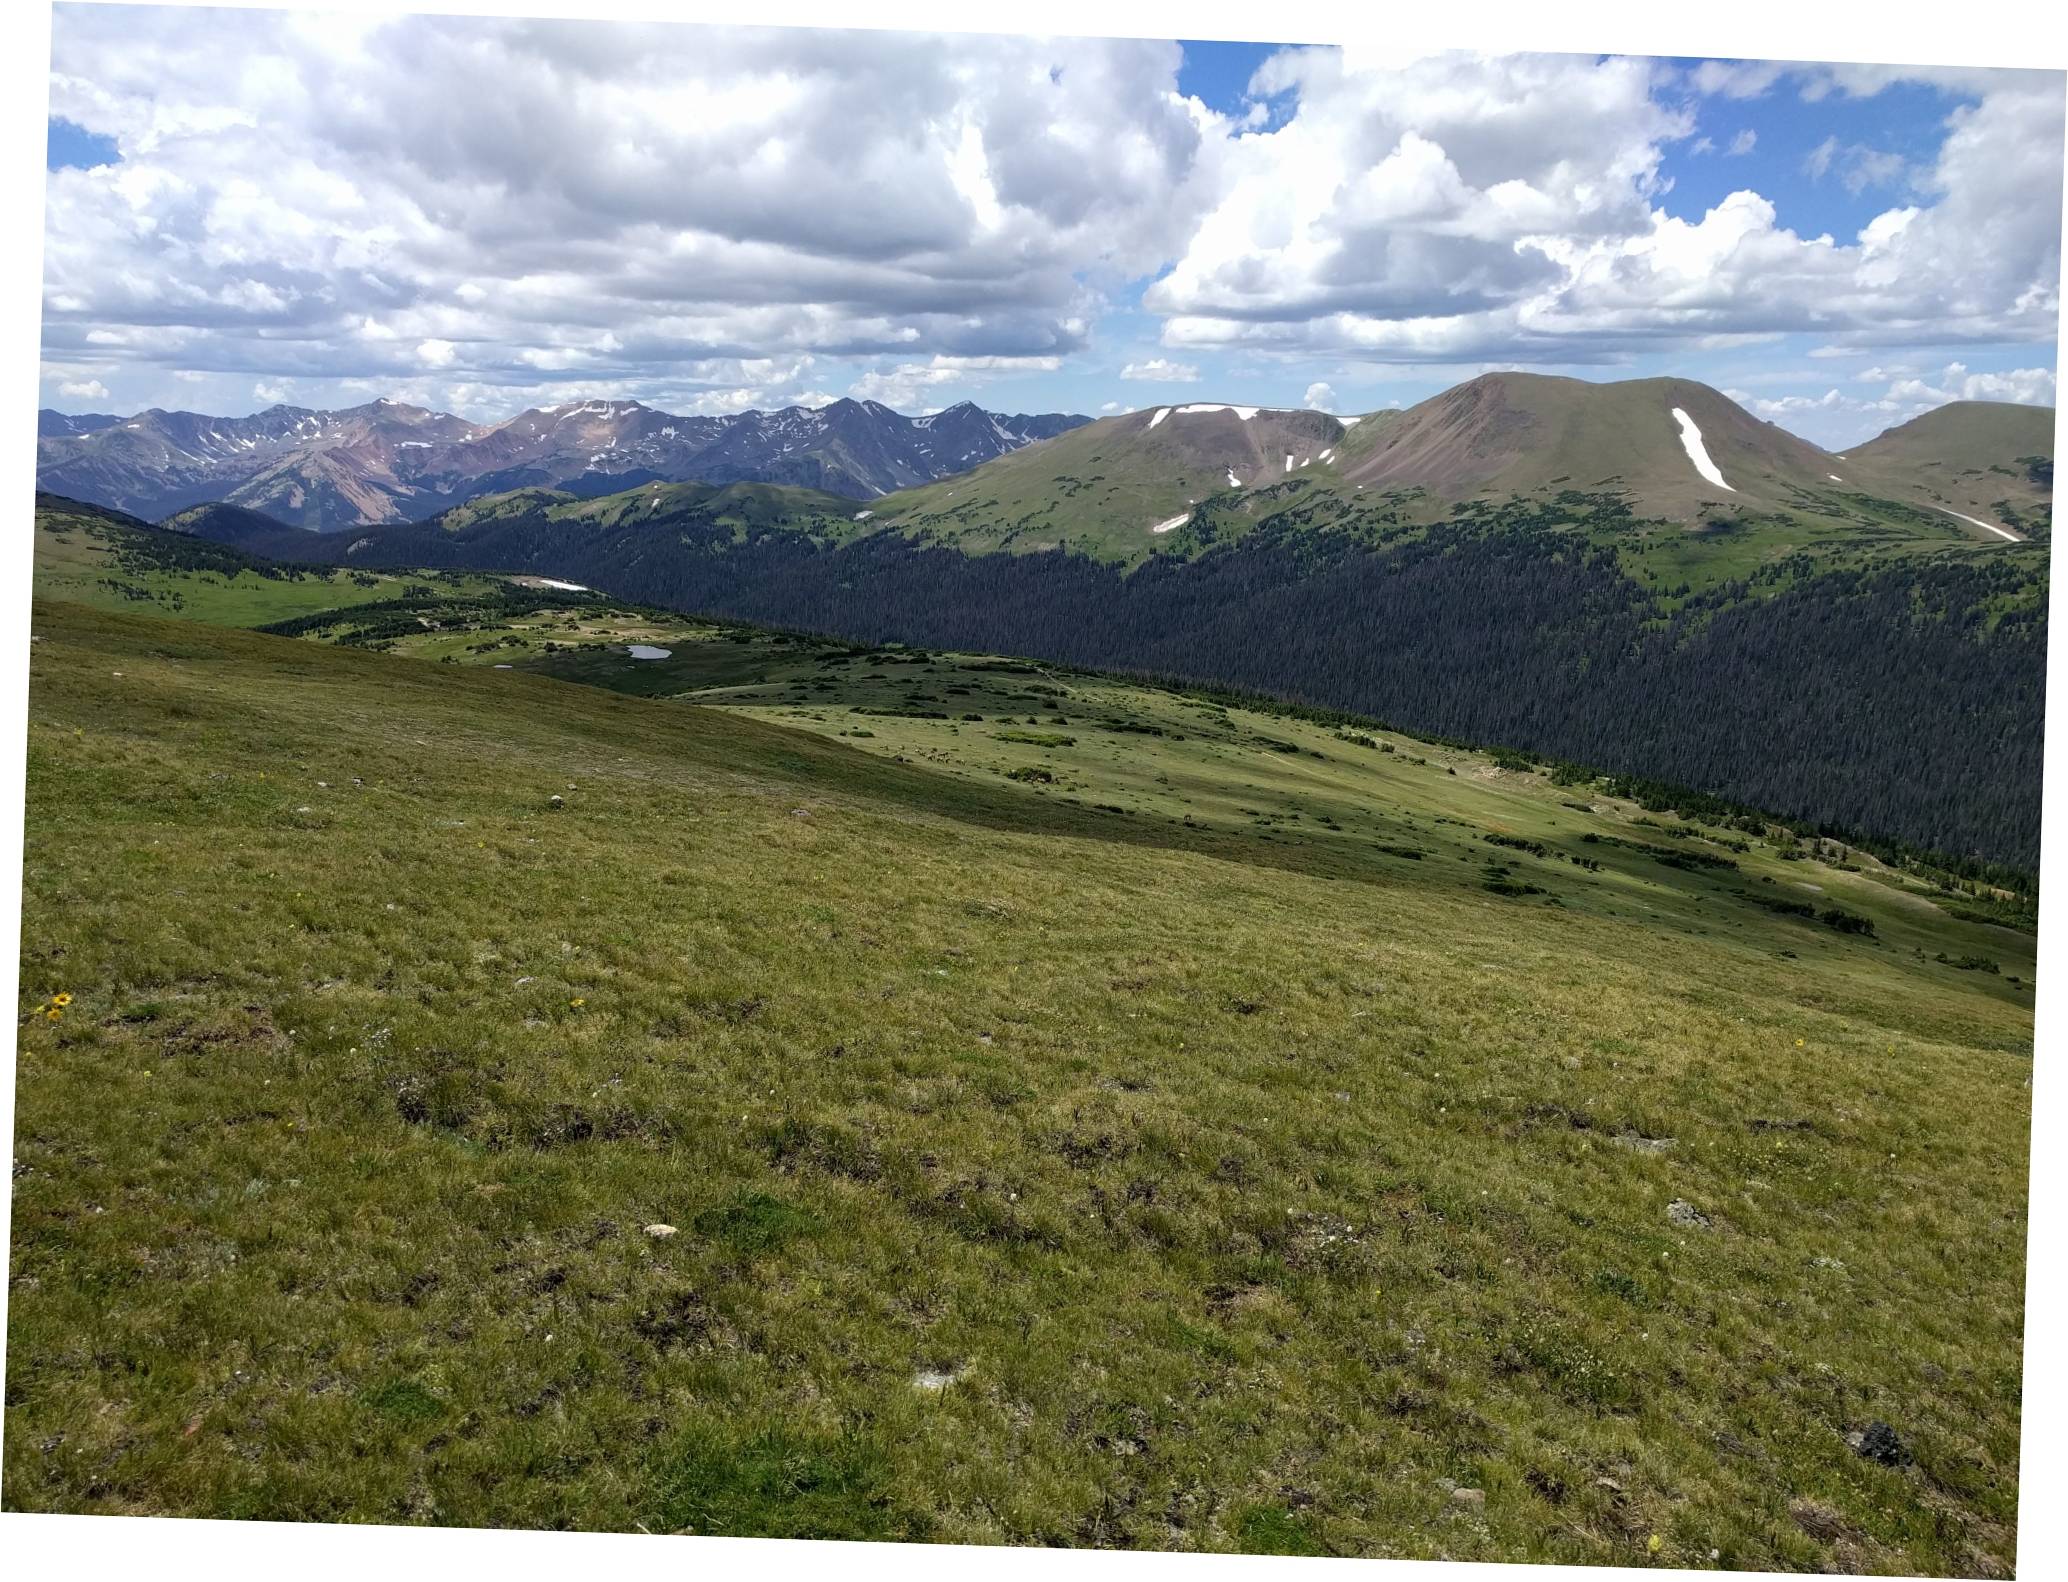 Image: A view of the Ute Trail and an adjacent reservoir from the Gore Range Overlook; there is fifty-odd mule deers grazing on the meadow below that can be spotted in the middle of the picture.